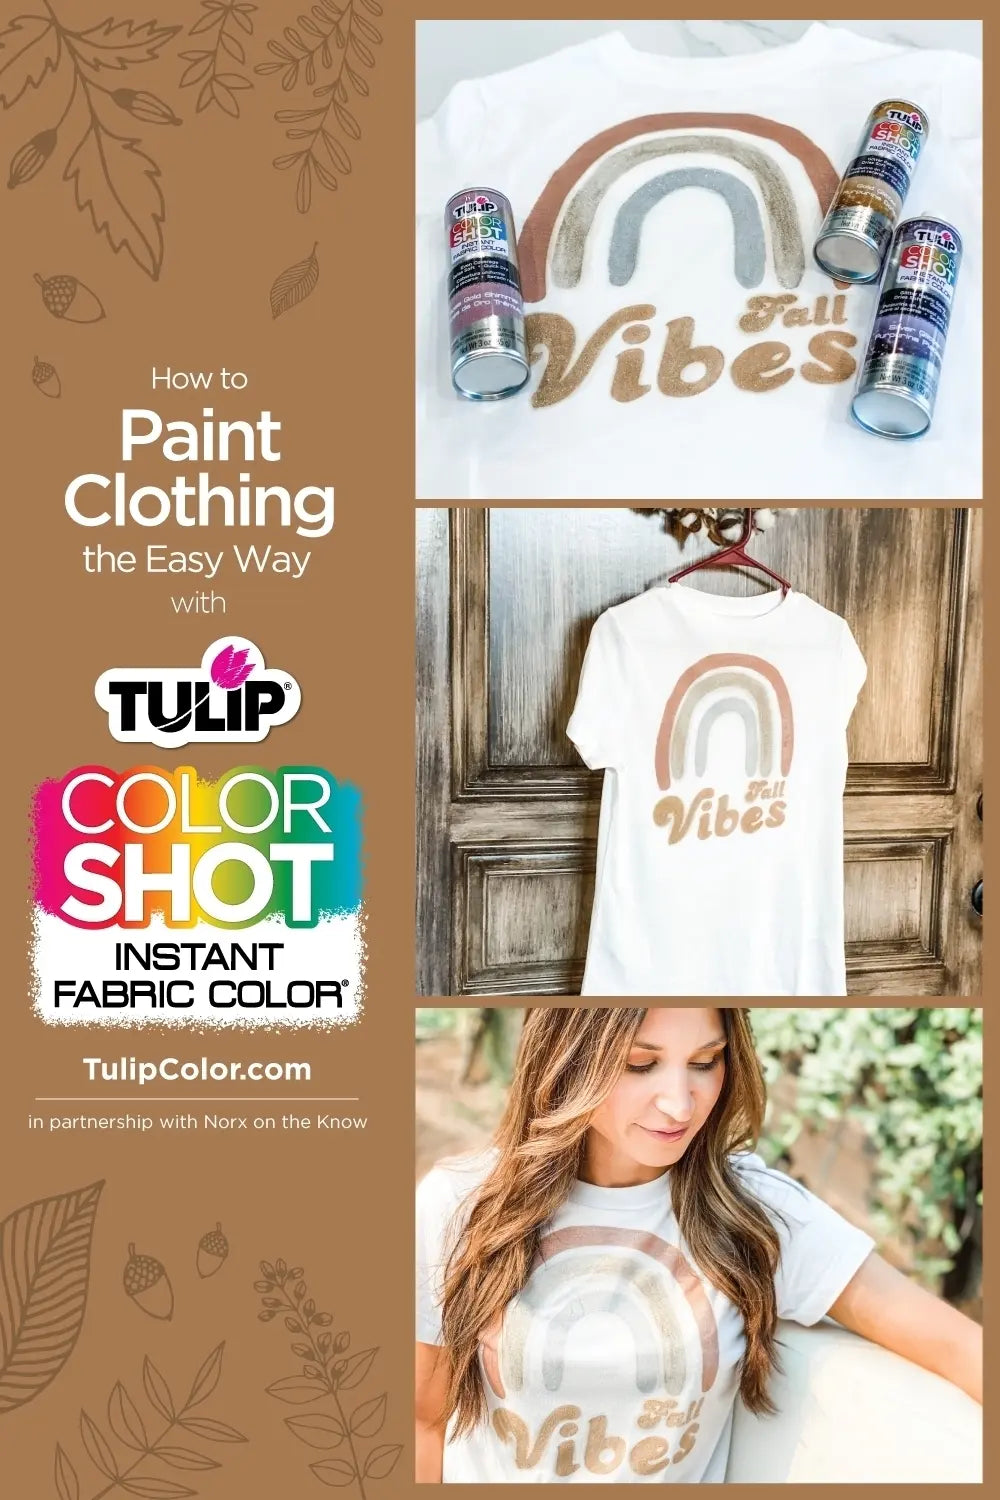 How to Paint Clothing the Easy Way with ColorShot